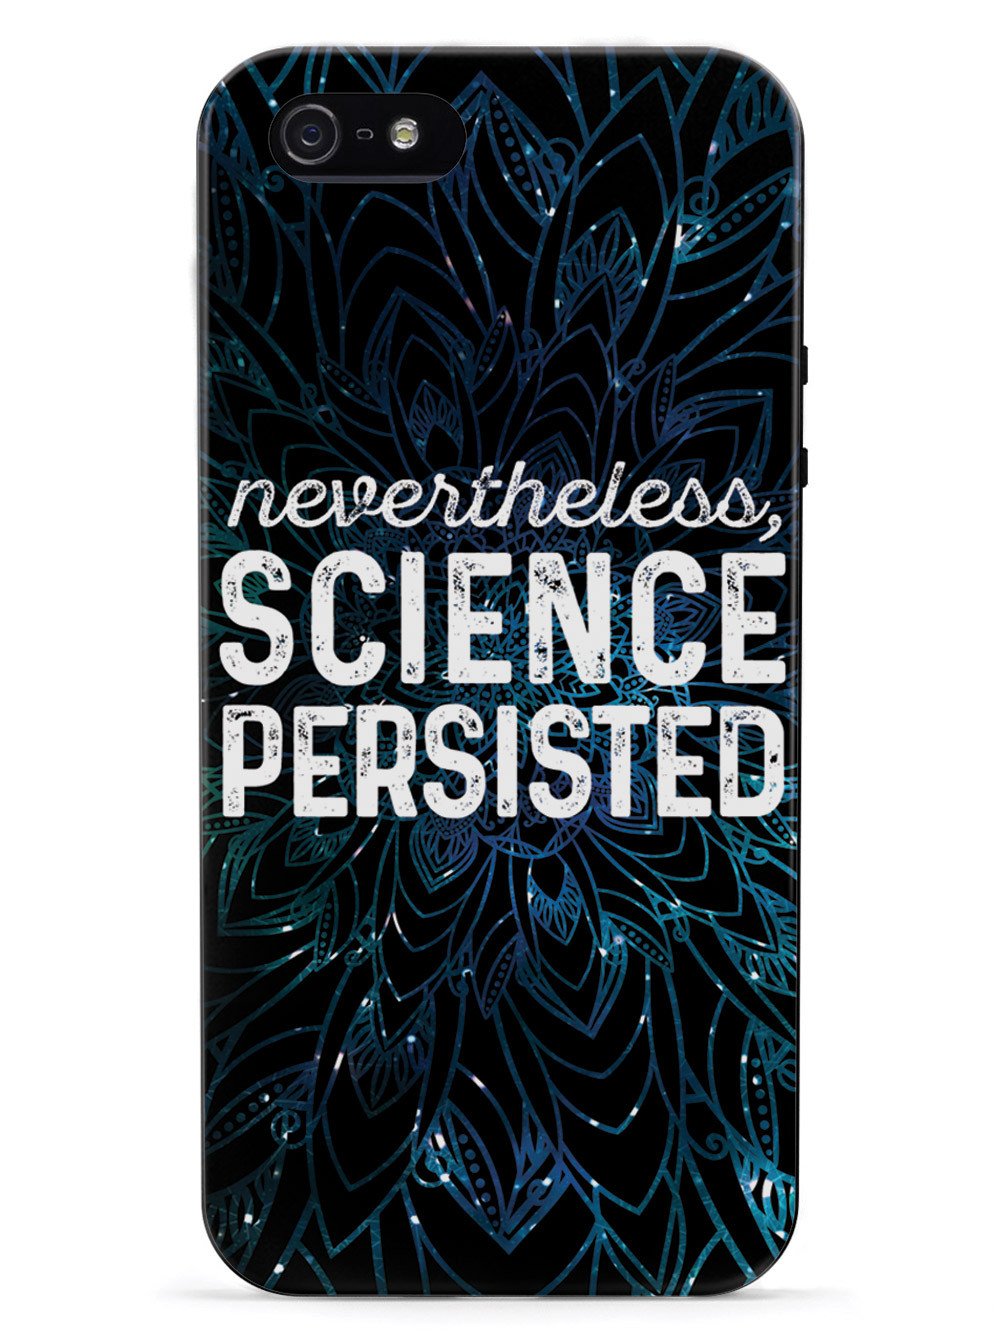 Nevertheless, Science Persisted - Black Case - pipercleo.com